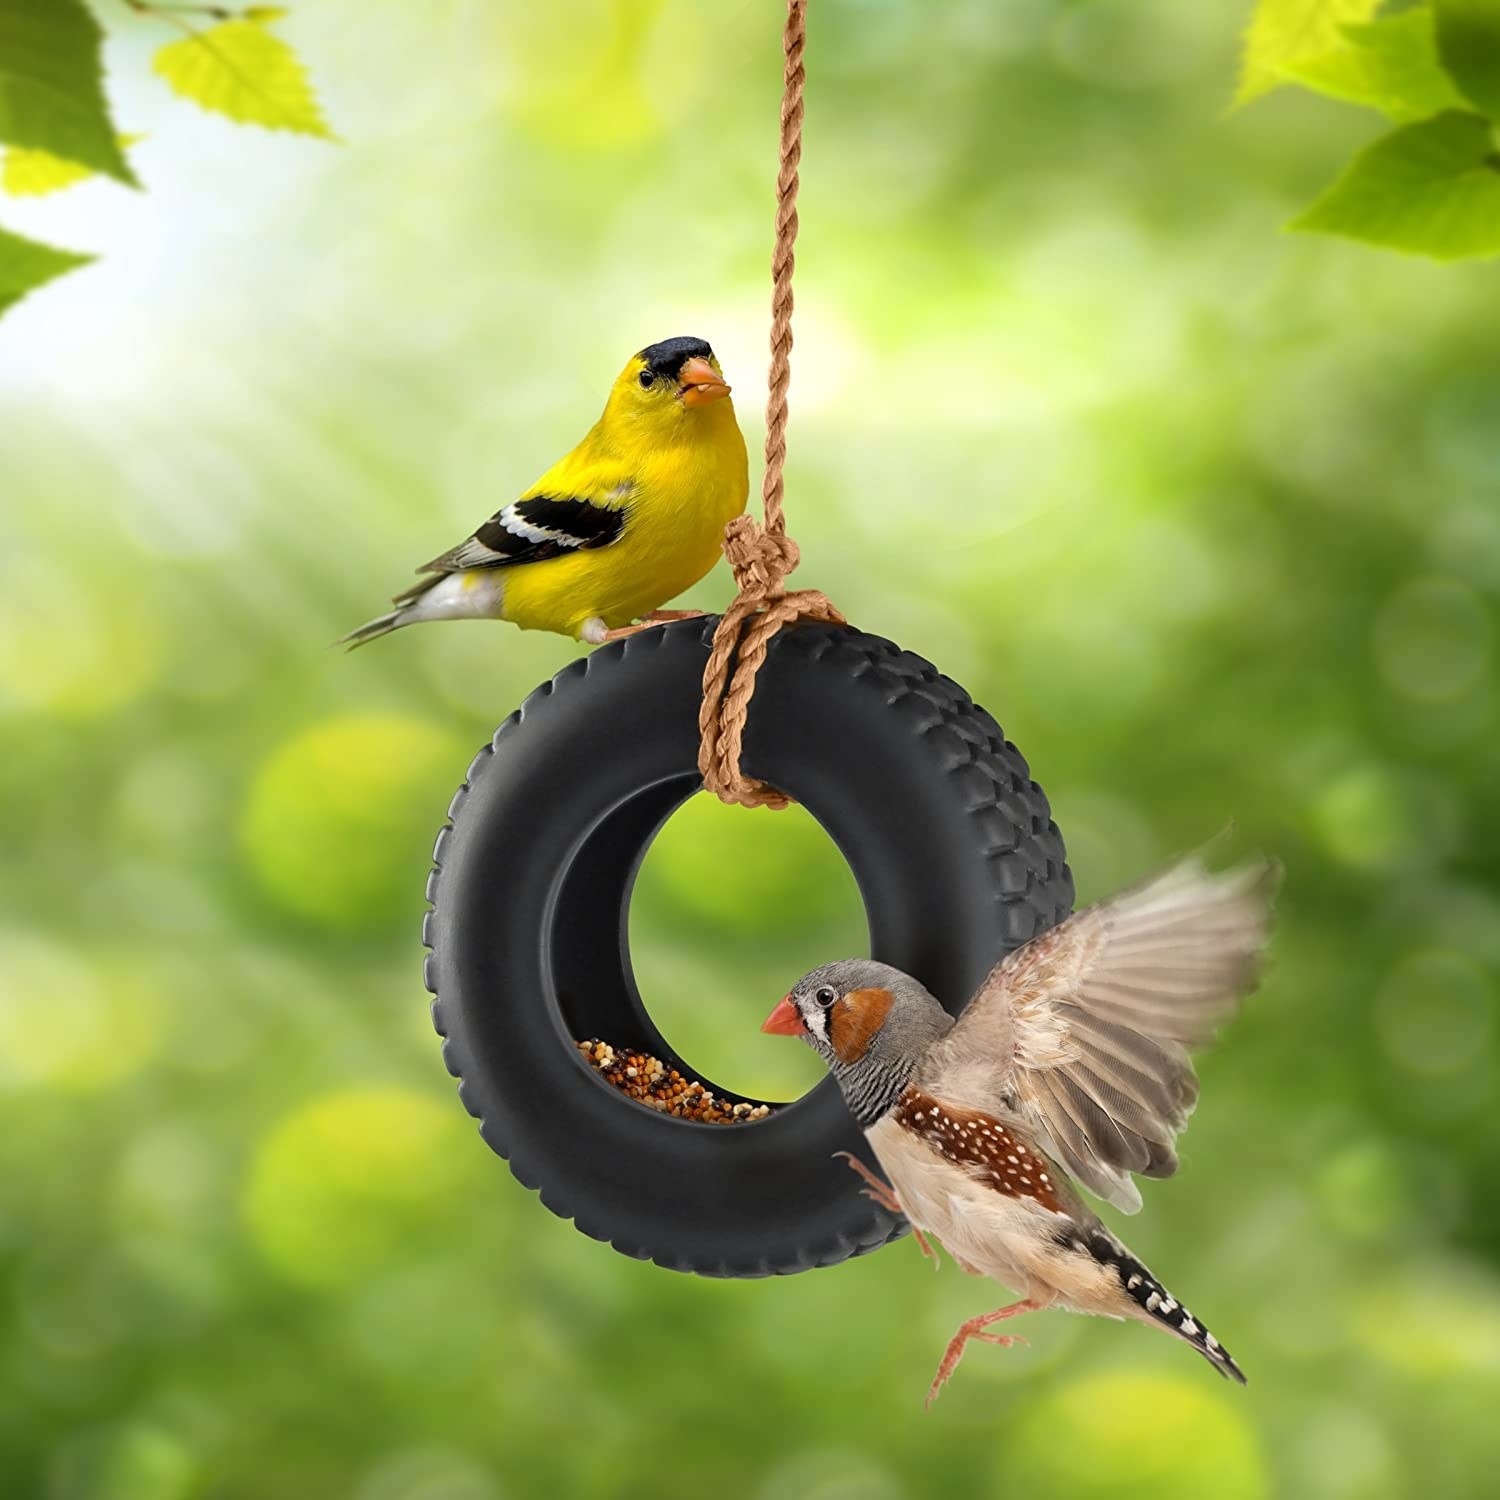 two birds eating from a tire swing bird feeder